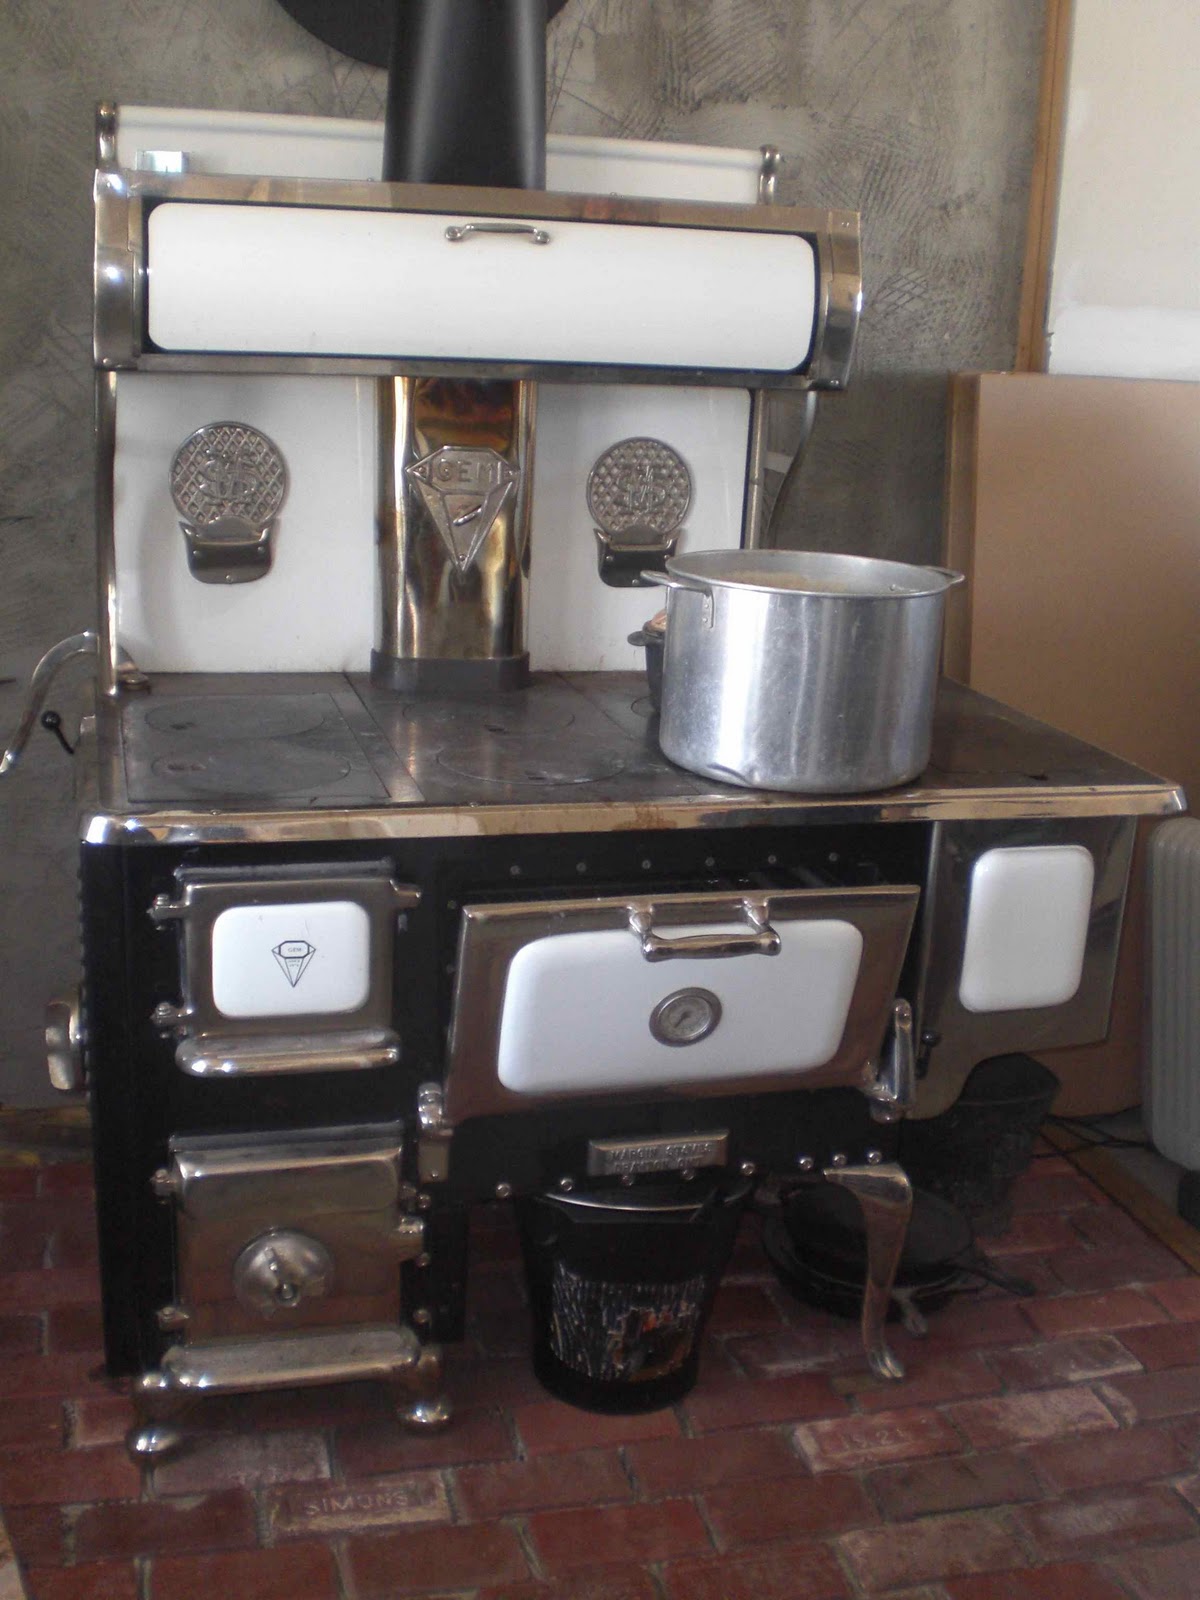 gardening in the boroughs of nyc: Dreaming of a Wood Stove